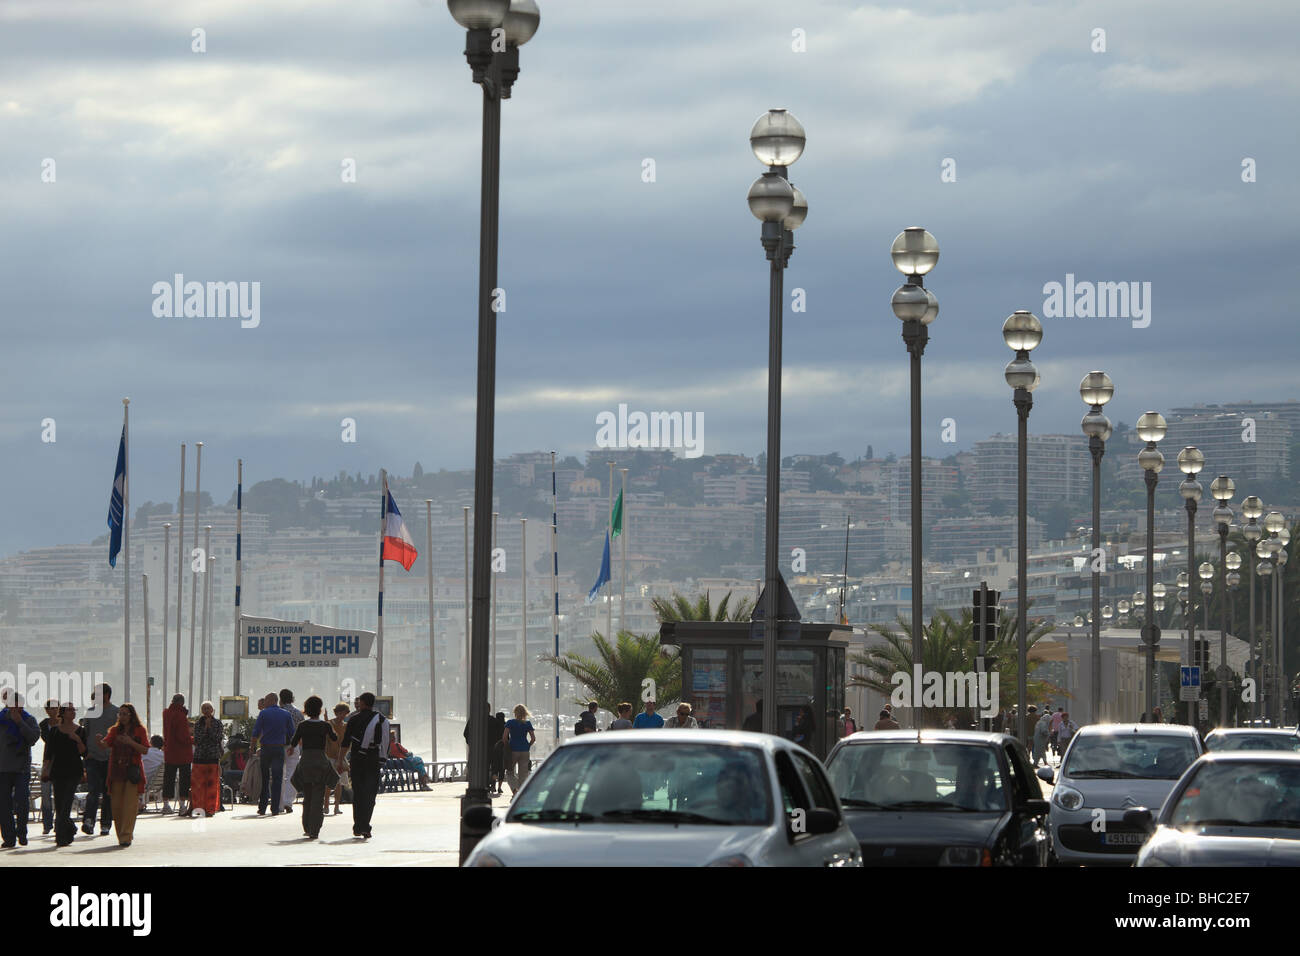 The Promenade des Anglais In Nice city under  a cloudy sky Stock Photo